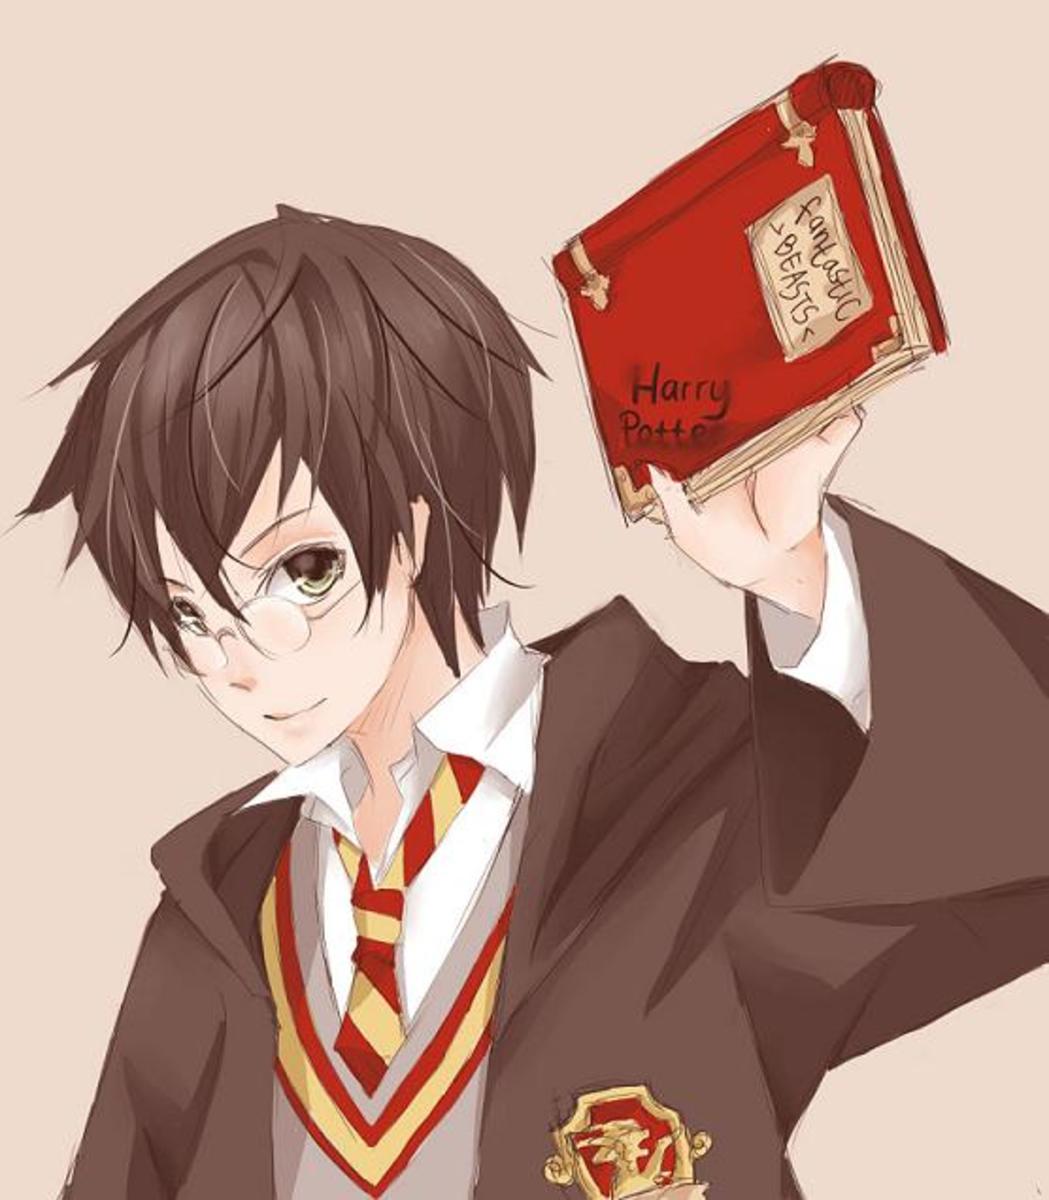 Fan art depicting Harry Potter with a copy of Newt Scamanders "Magical Beasts and Where to Find Them."